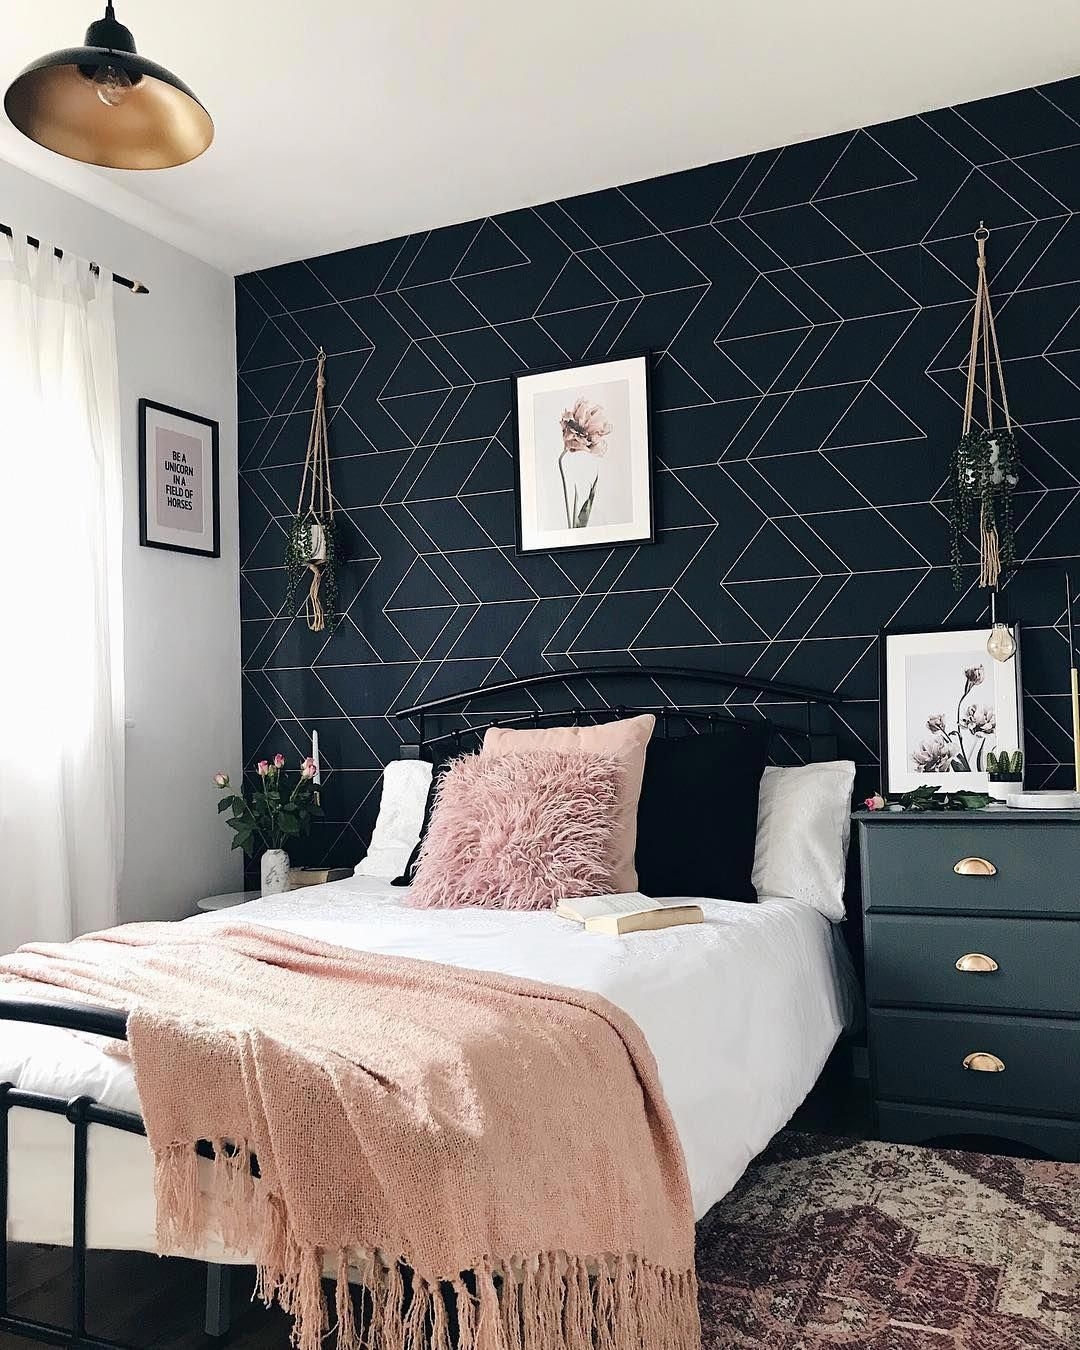 Opt for Geometric Patterns